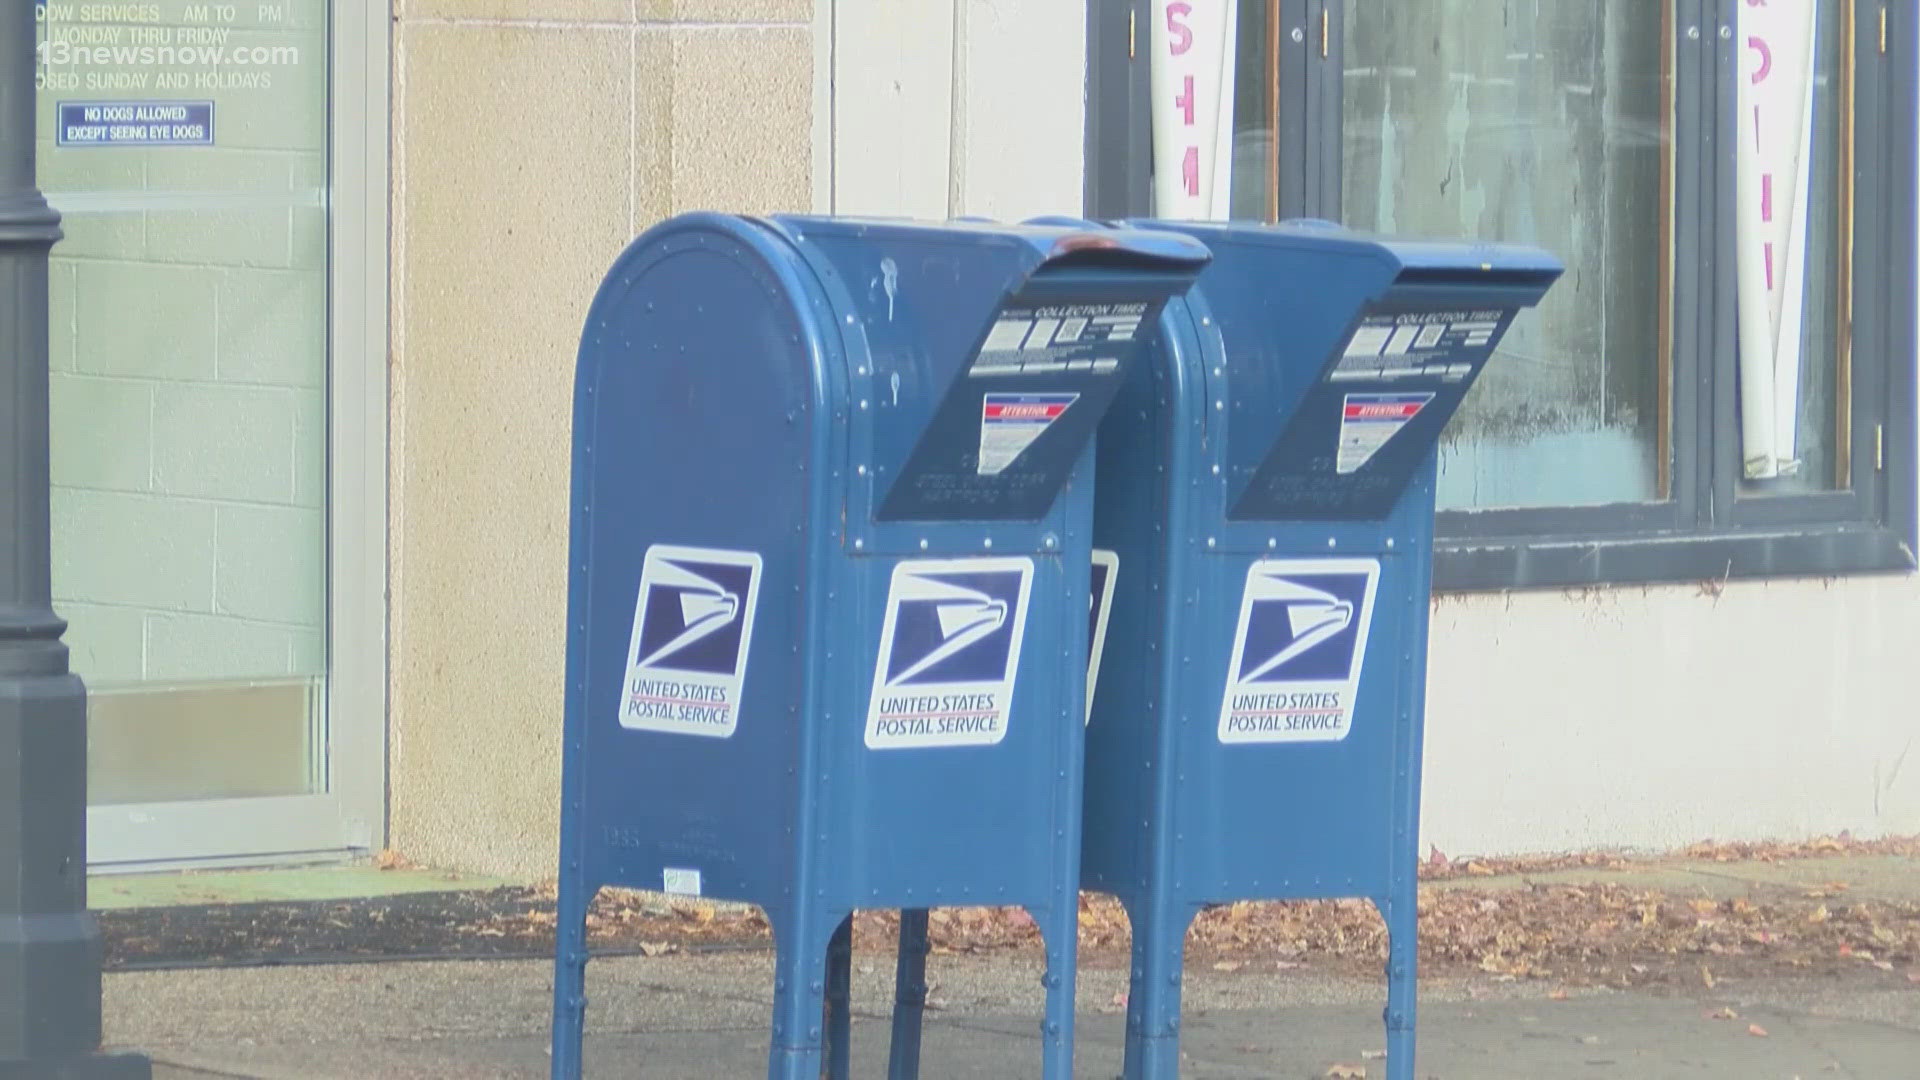 Members of the Hampton Roads congressional delegation took residents' complaints directly to the top of the Postmaster General.